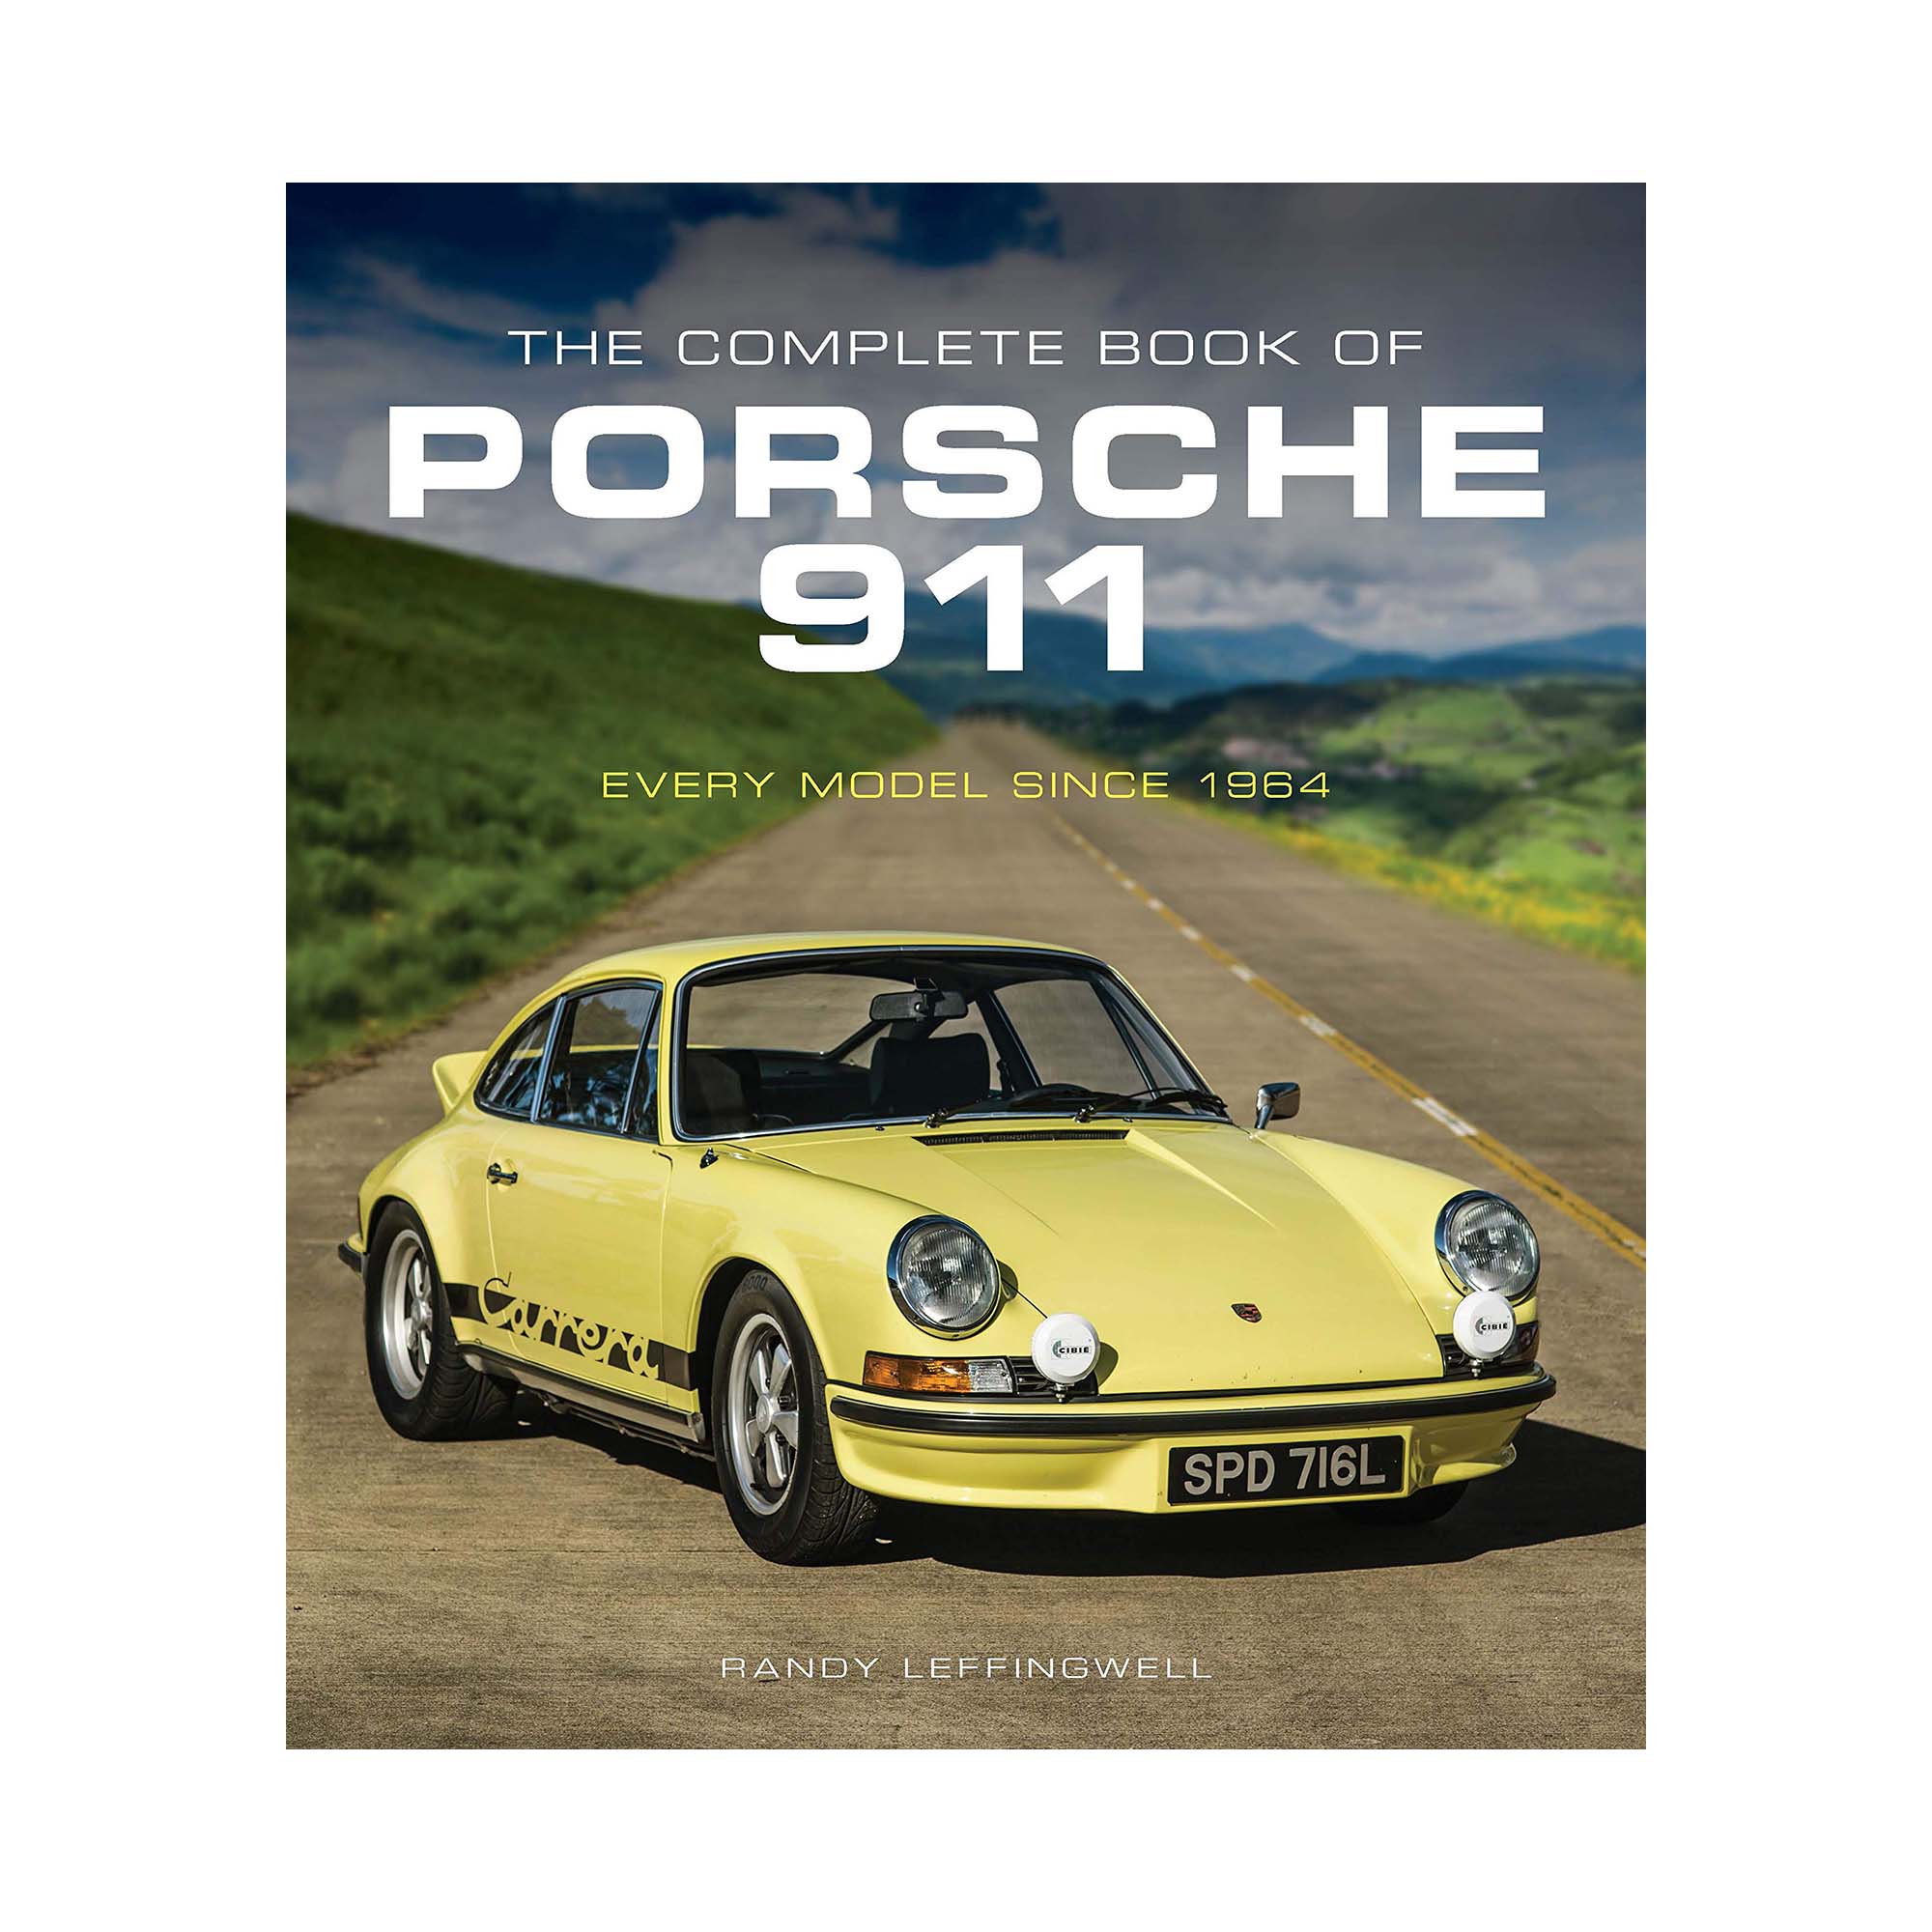 The Complete Book of Porsche 911: Every Model Since 1964 (Complete Book Series) - Hardcover